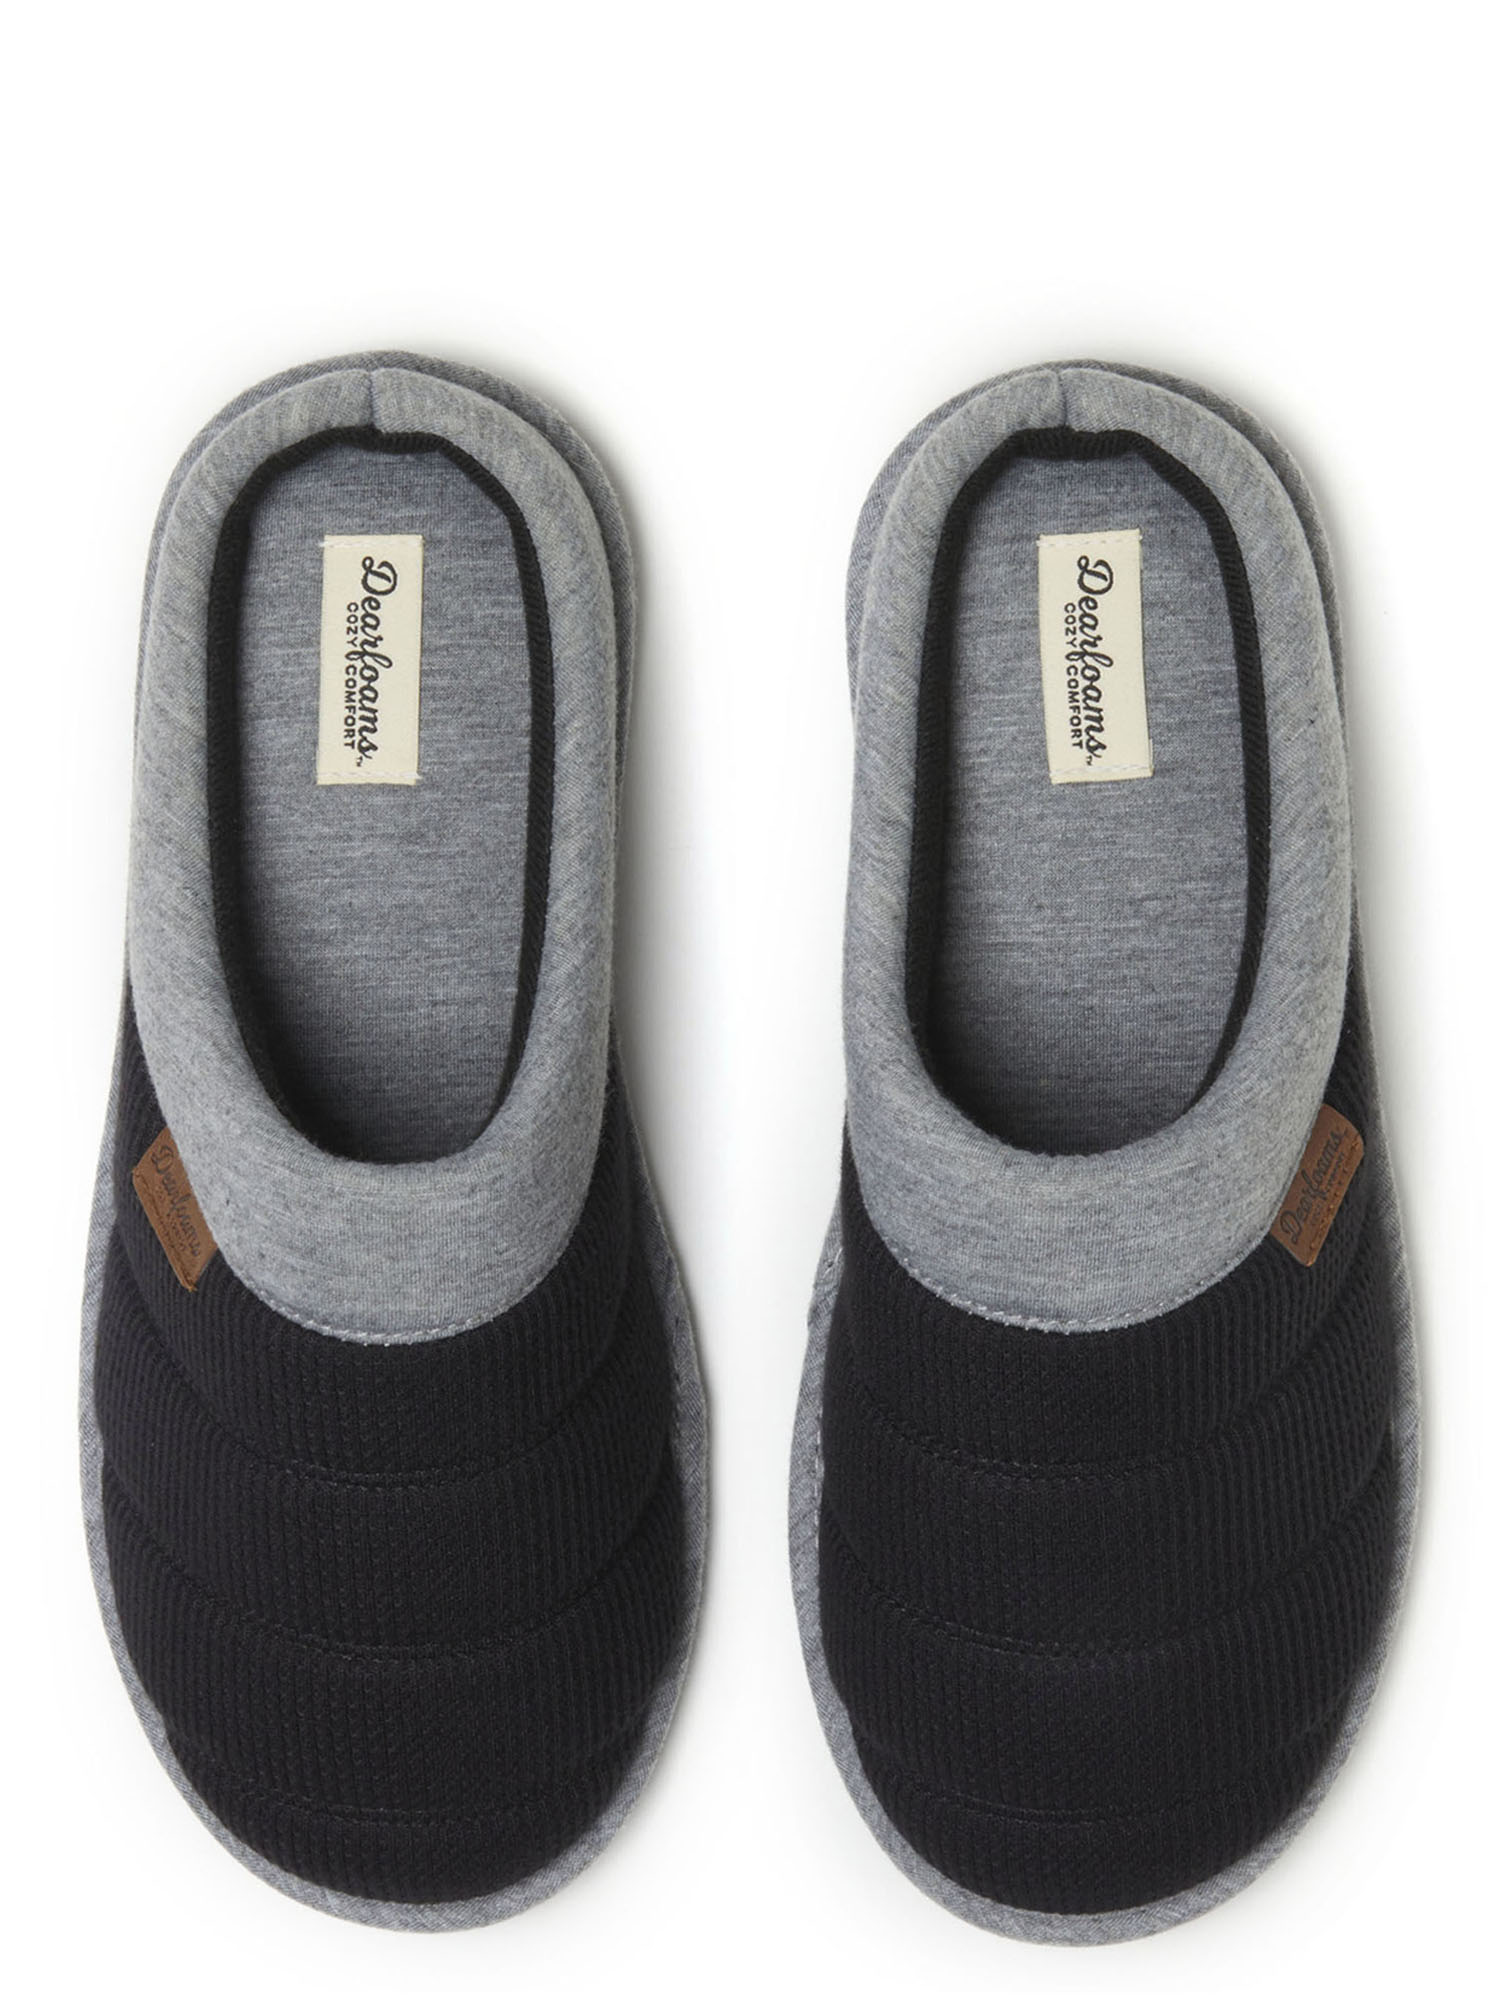 Dearfoams Cozy Comfort Men's Bound Knit Clog Slippers - image 4 of 5